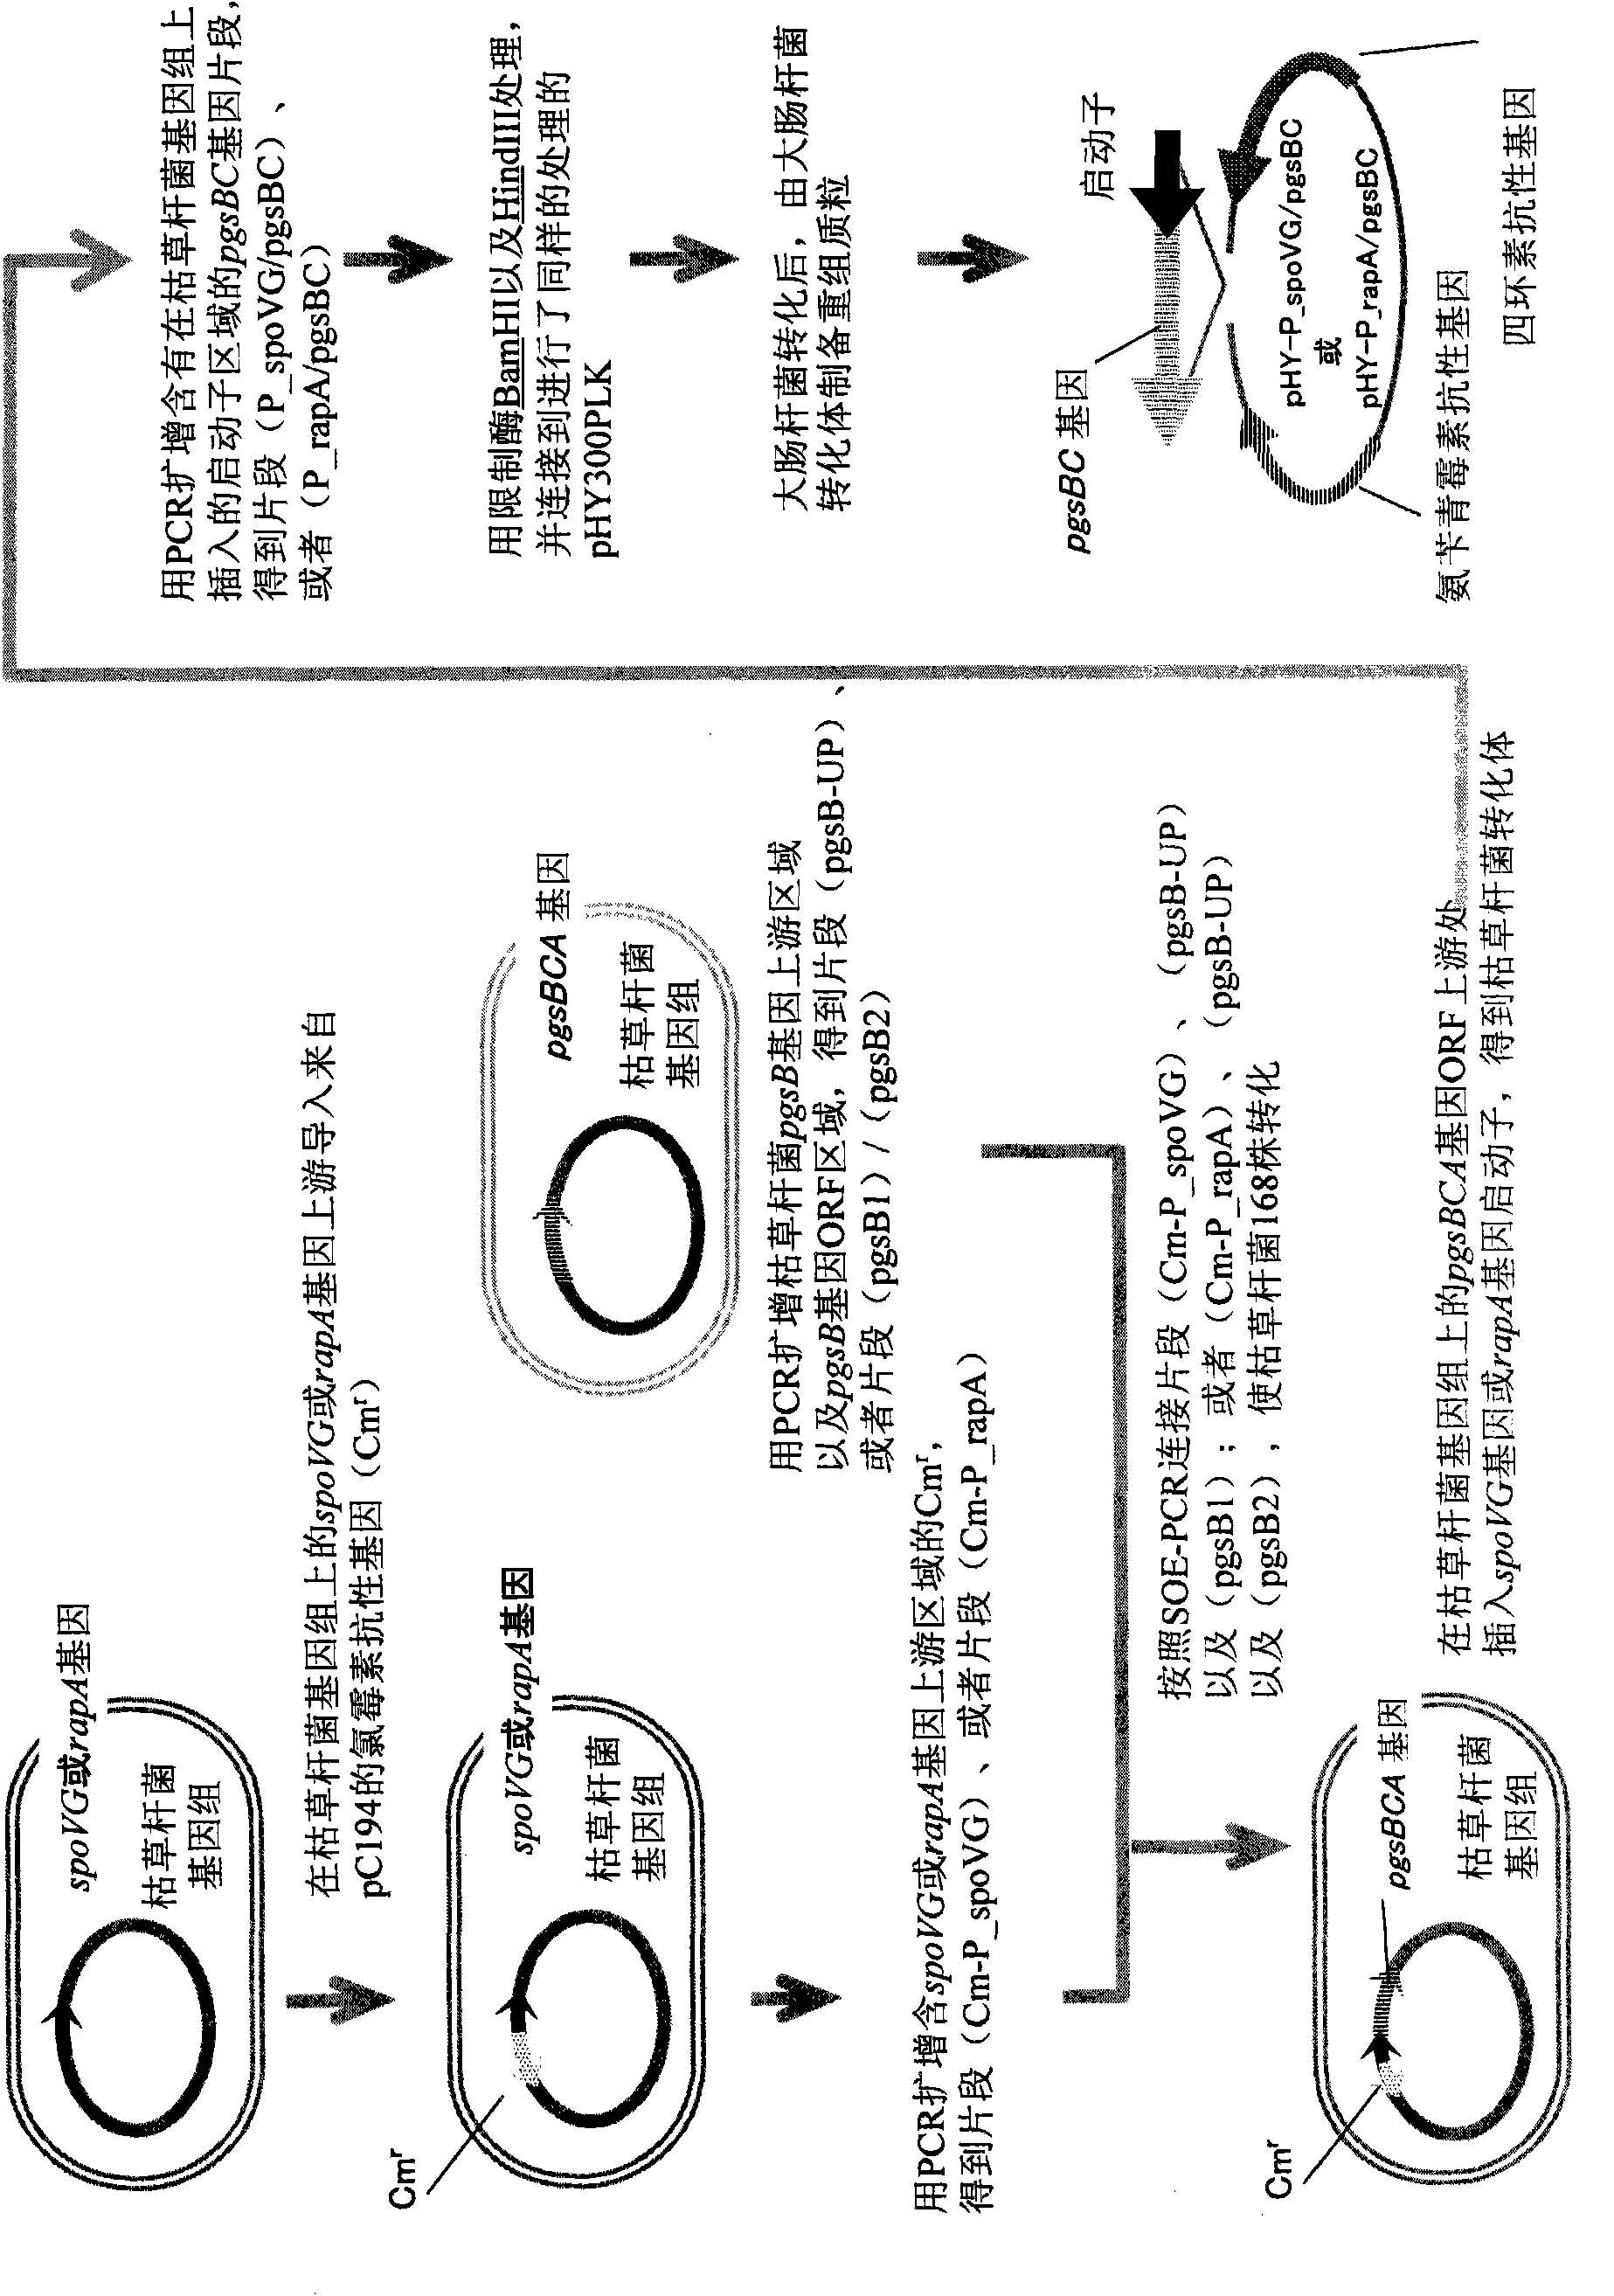 Recombinant microorganism and method for producing poly-gamma-glutamic acid